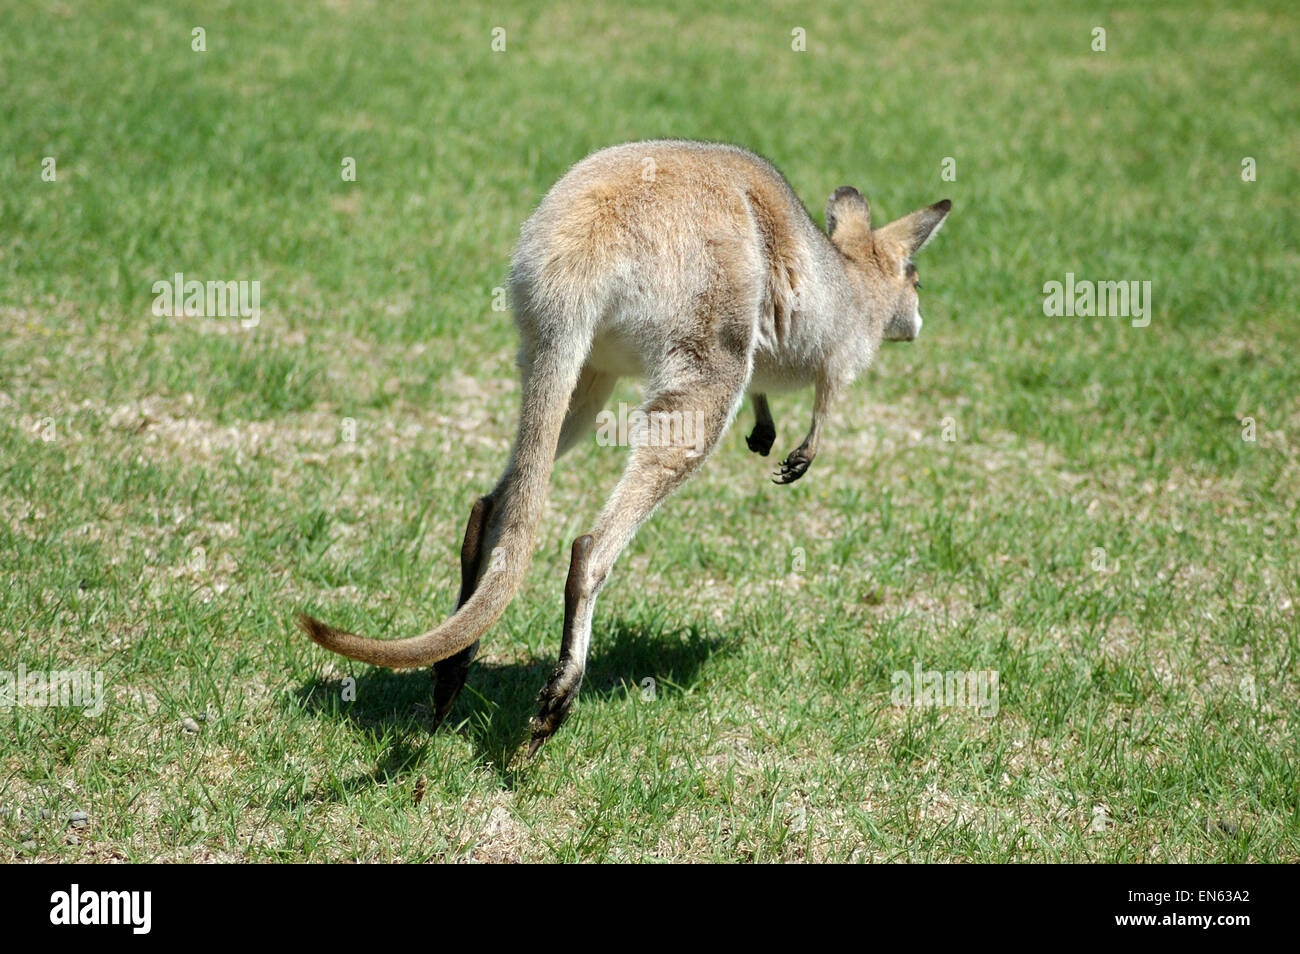 Red-necked wallaby, Macropus rufogriseus, also known as the Brush wallaby, Brush kangaroo, Brusher, or Red wallaby. Stock Photo